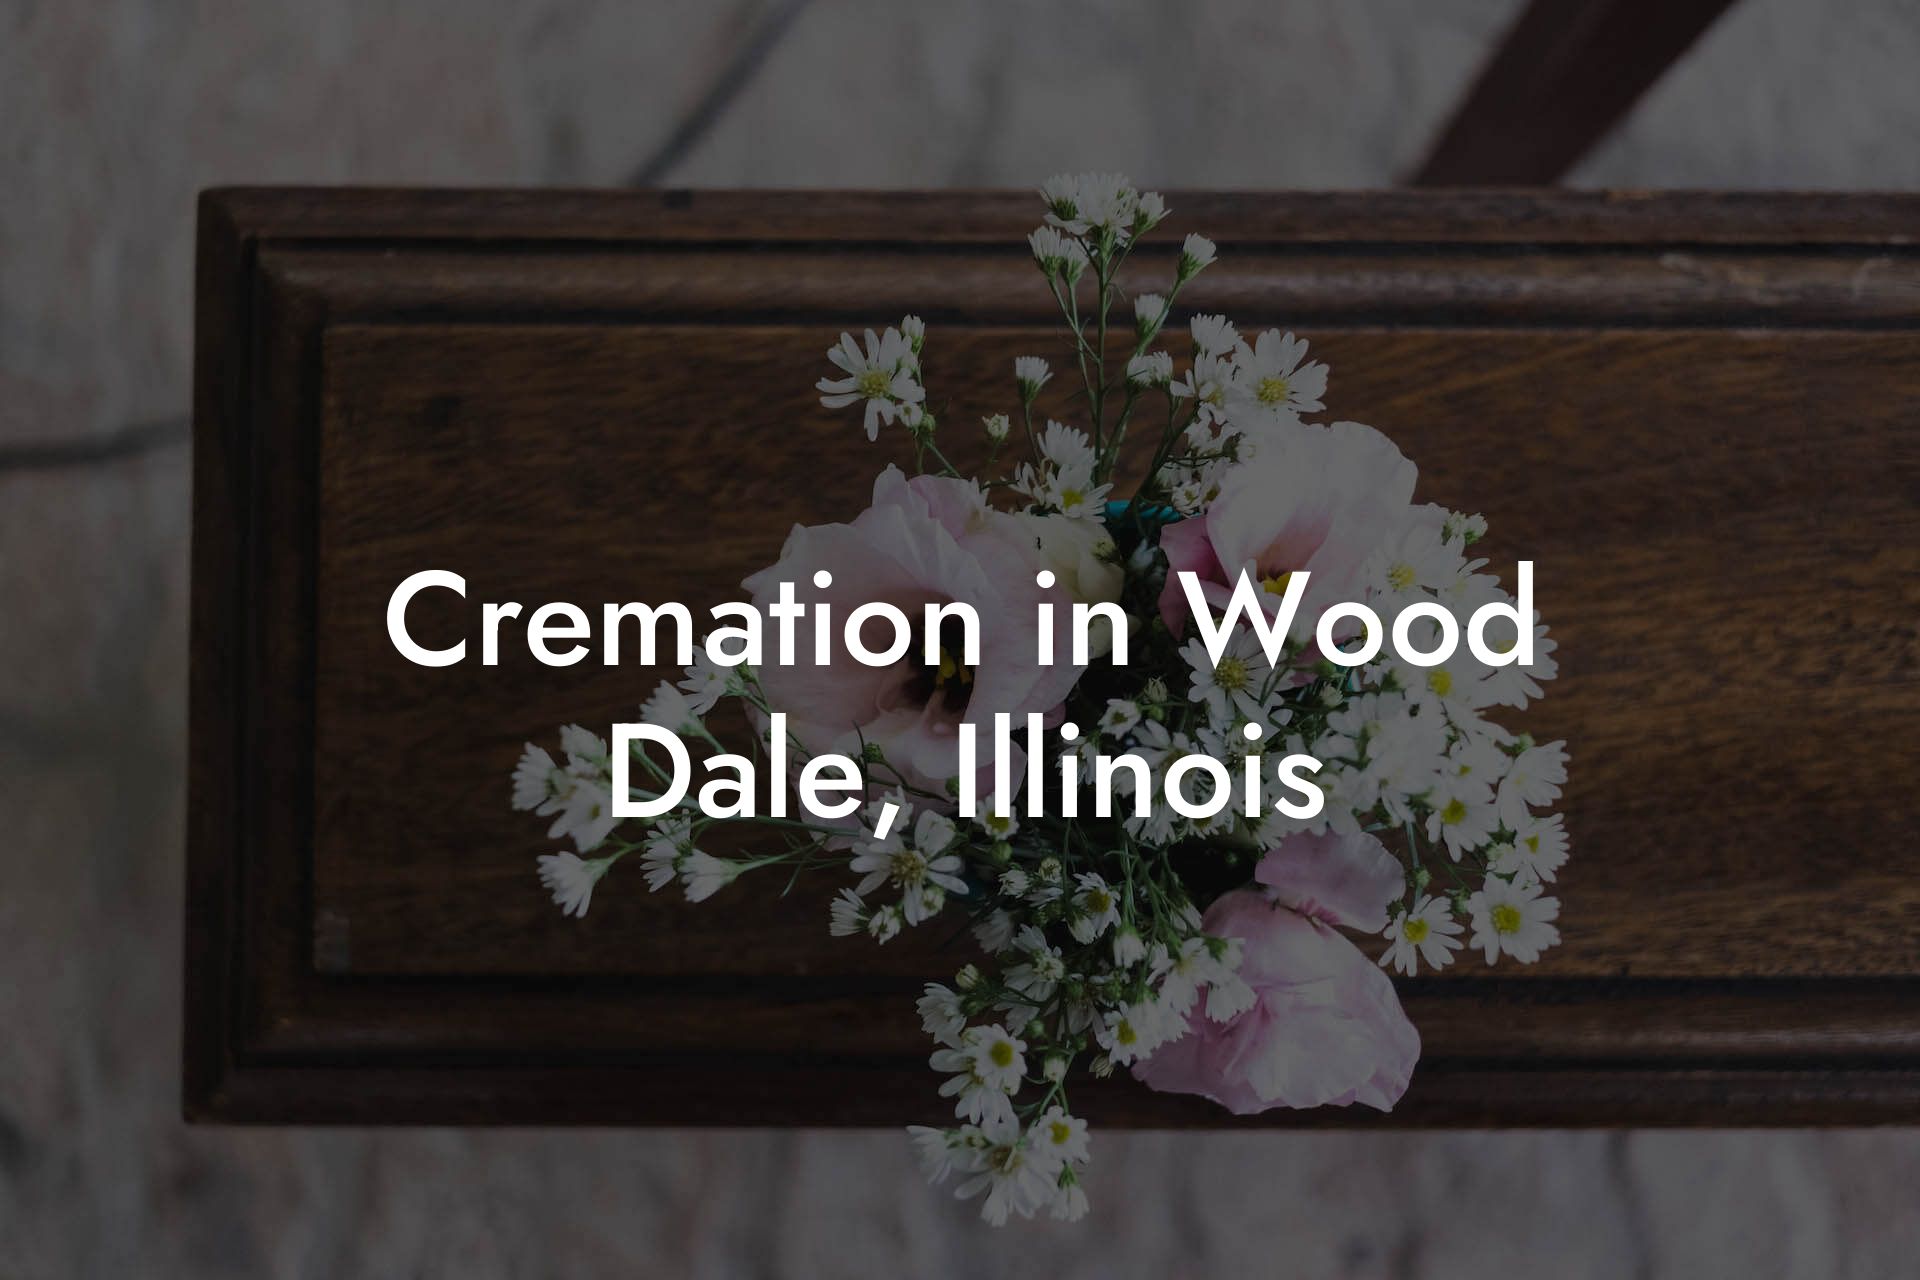 Cremation in Wood Dale, Illinois